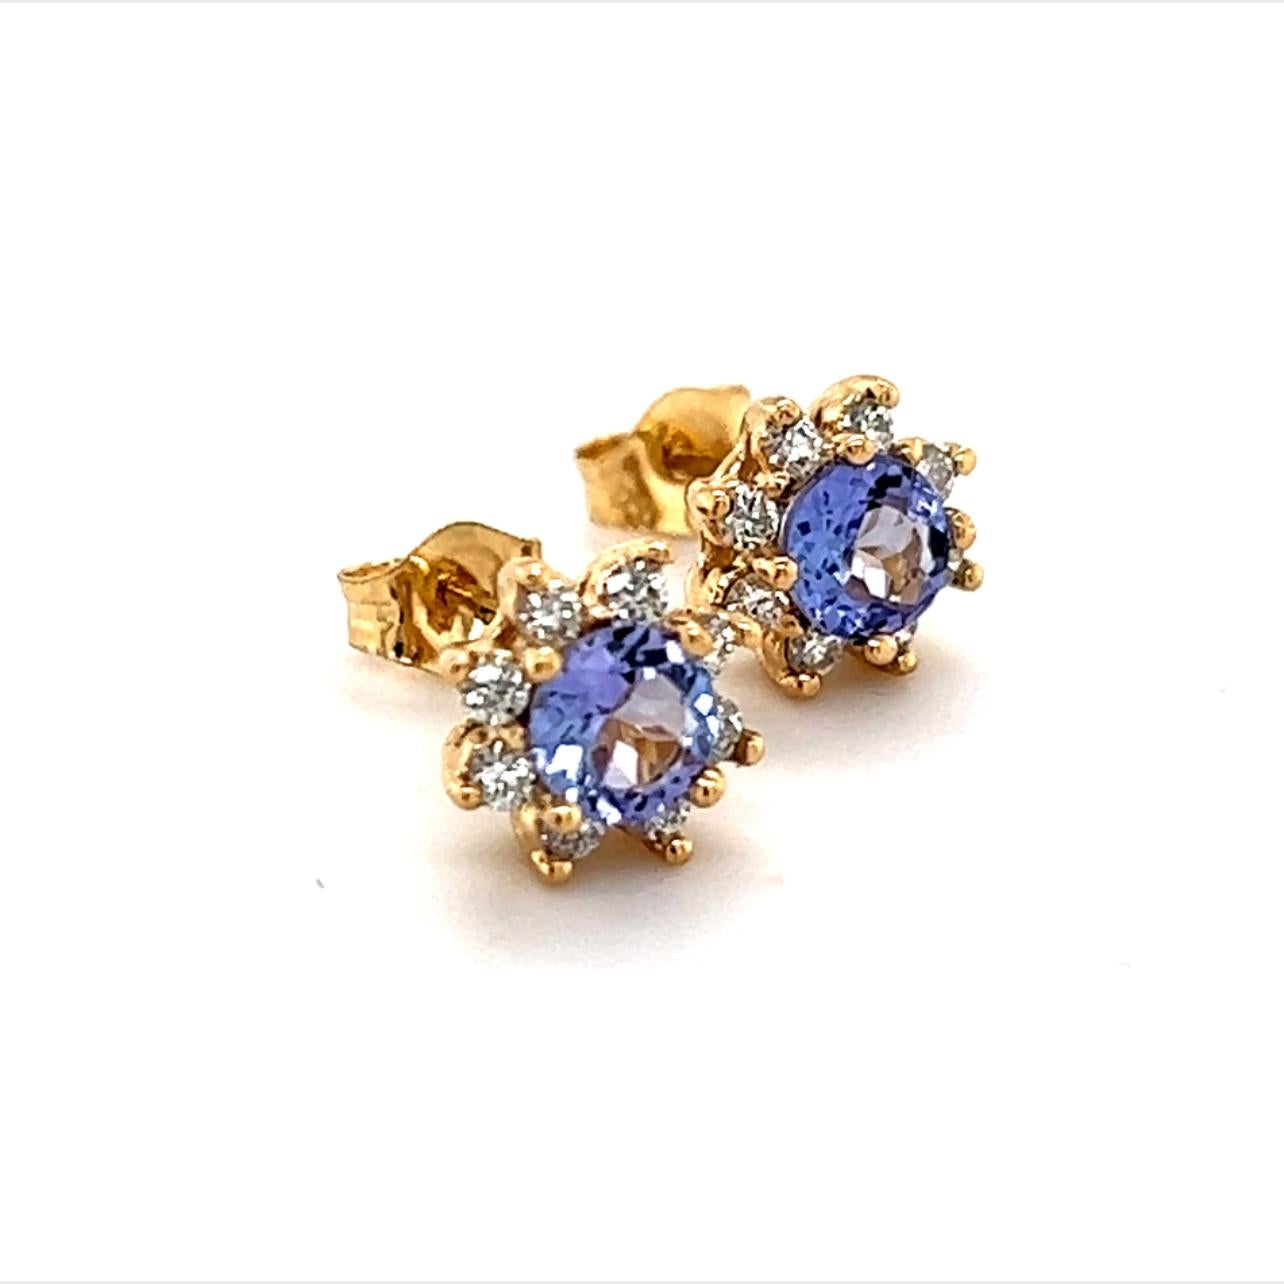 Natural Sapphire Diamond Earrings 14k Gold 1.0 TCW Certified For Sale 3